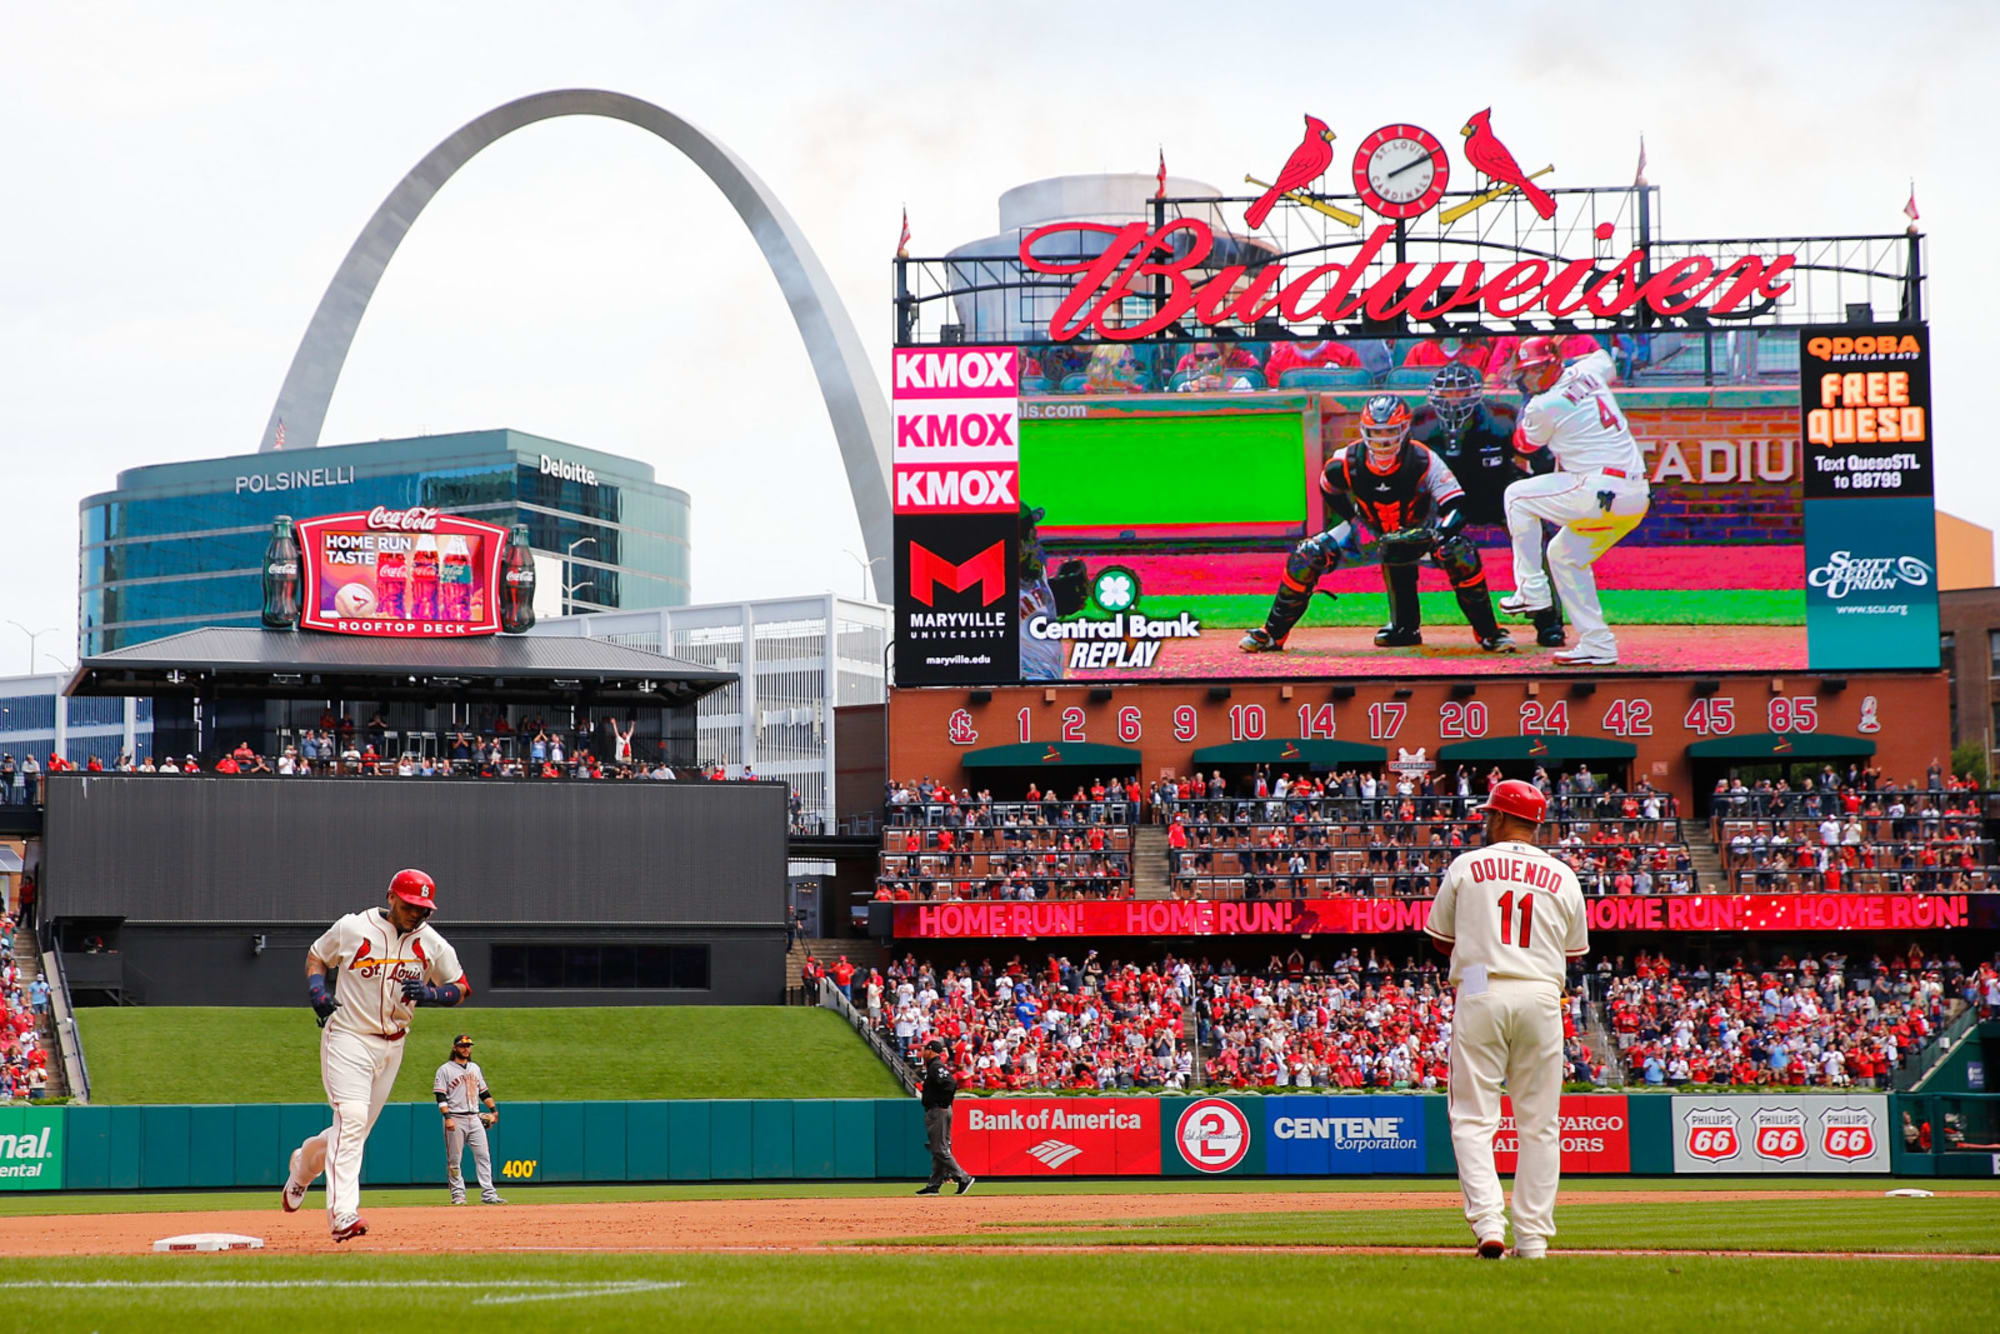 St. Louis Cardinals: Cardinals home opener moved to Friday